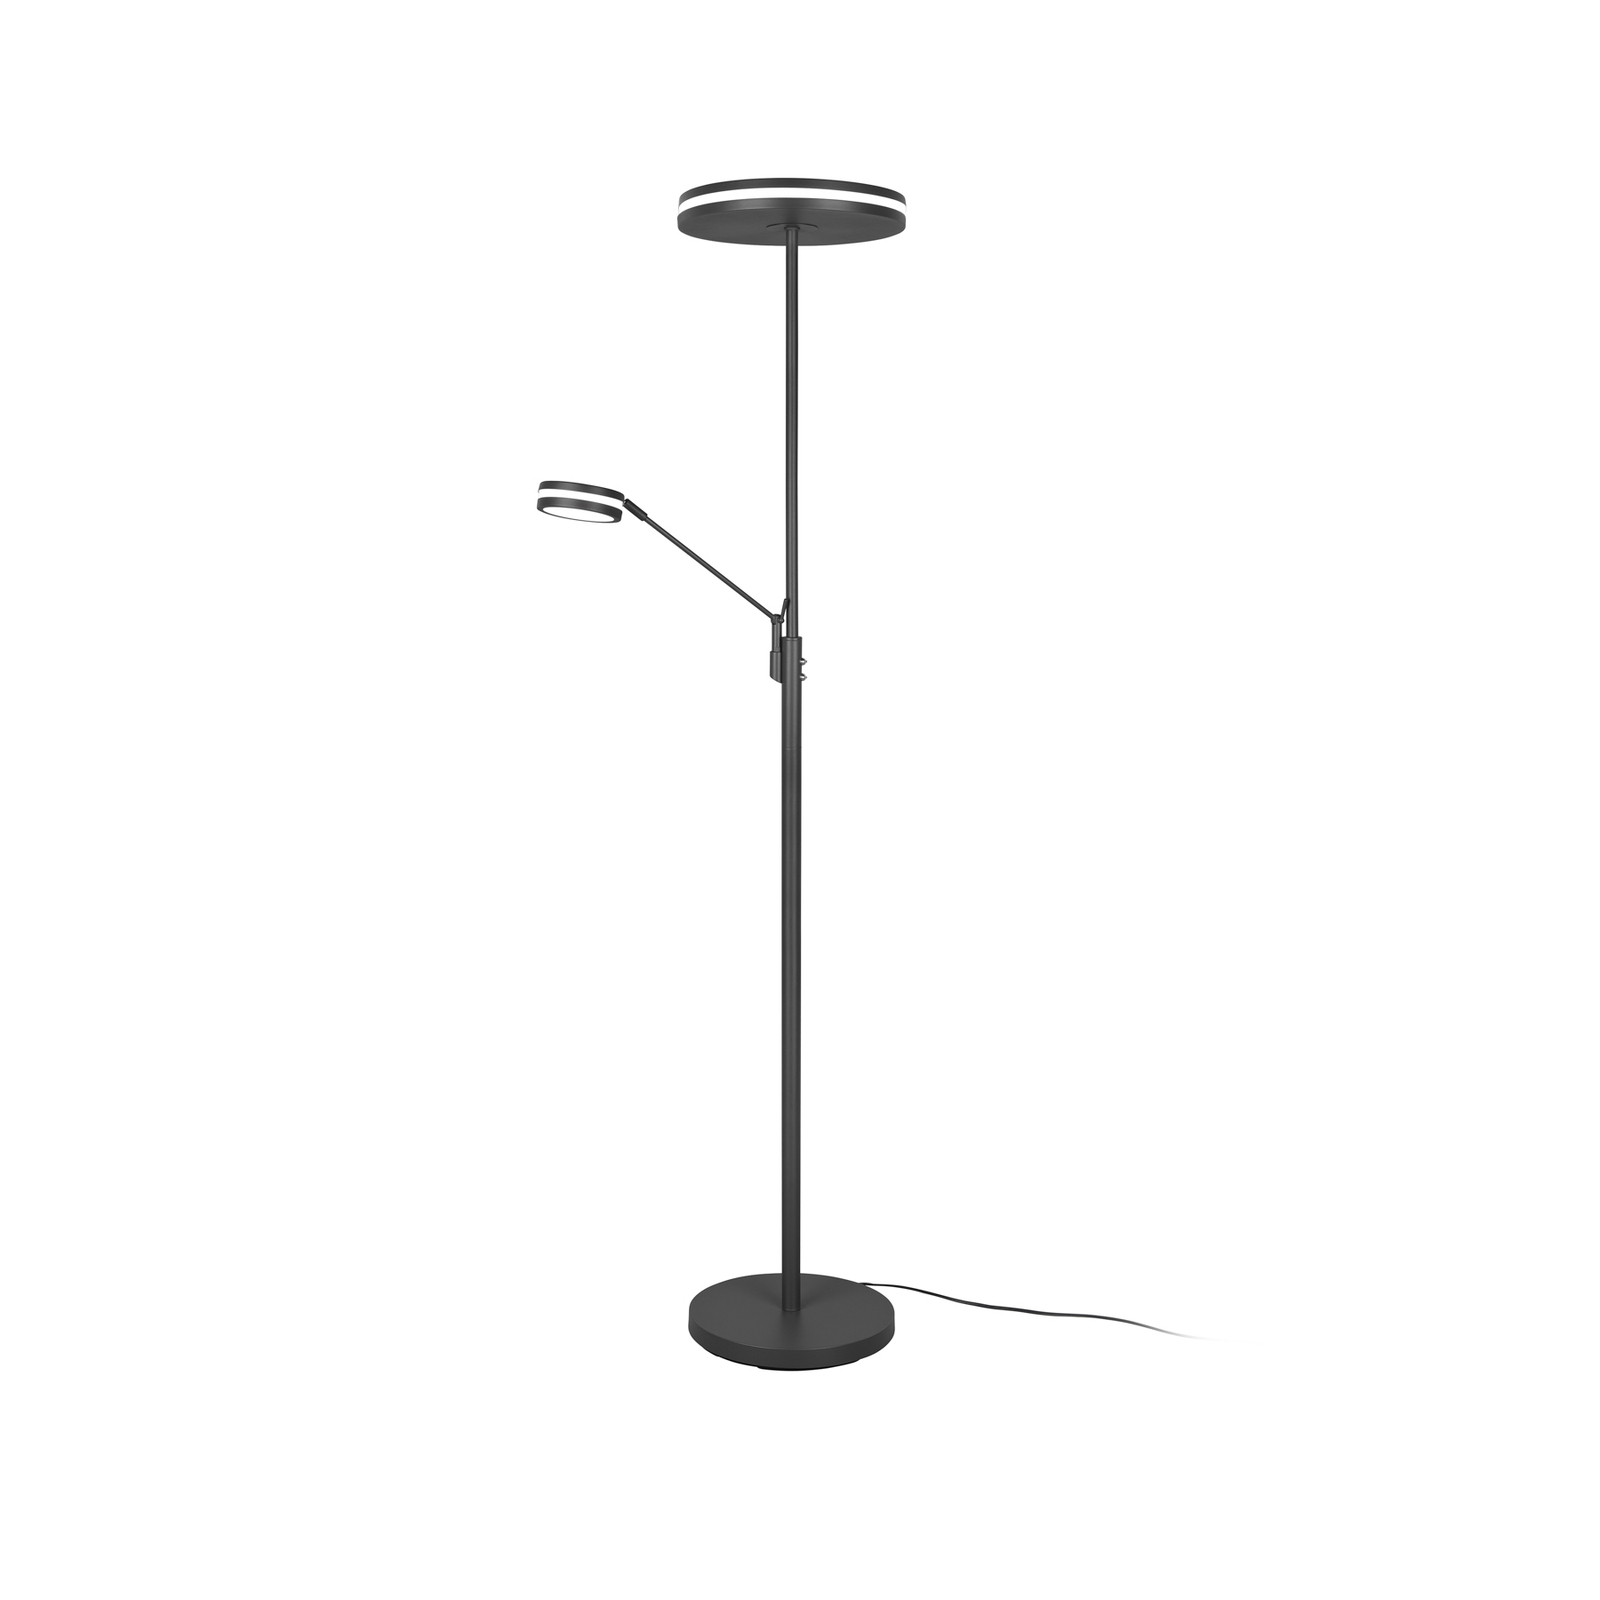 Lampadaire LED Franklin, liseuse, anthracite